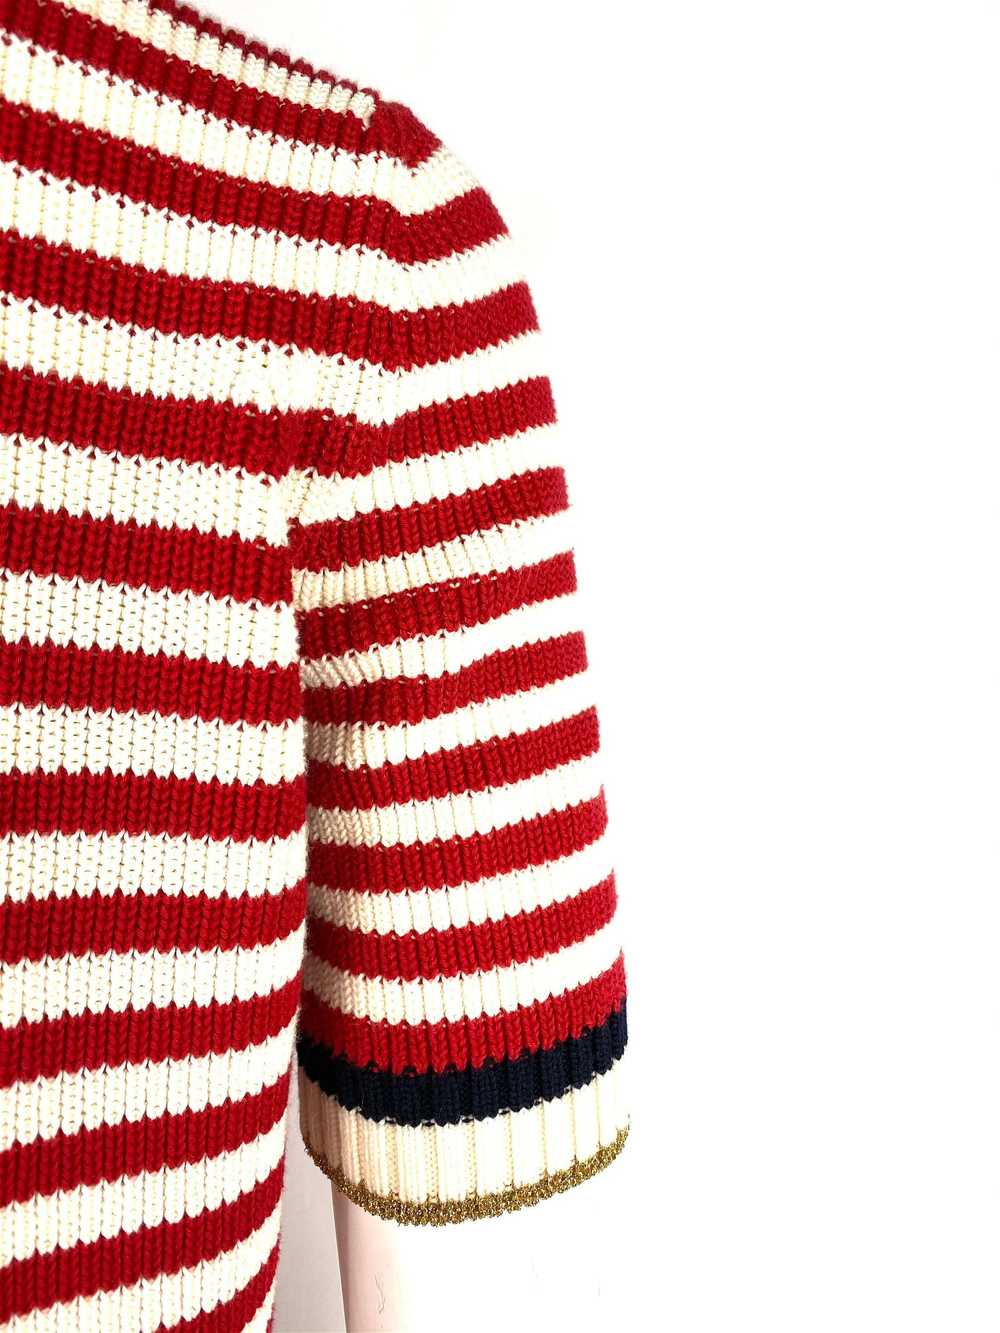 Gucci Red and White Wool Knit Sweater Top - image 2